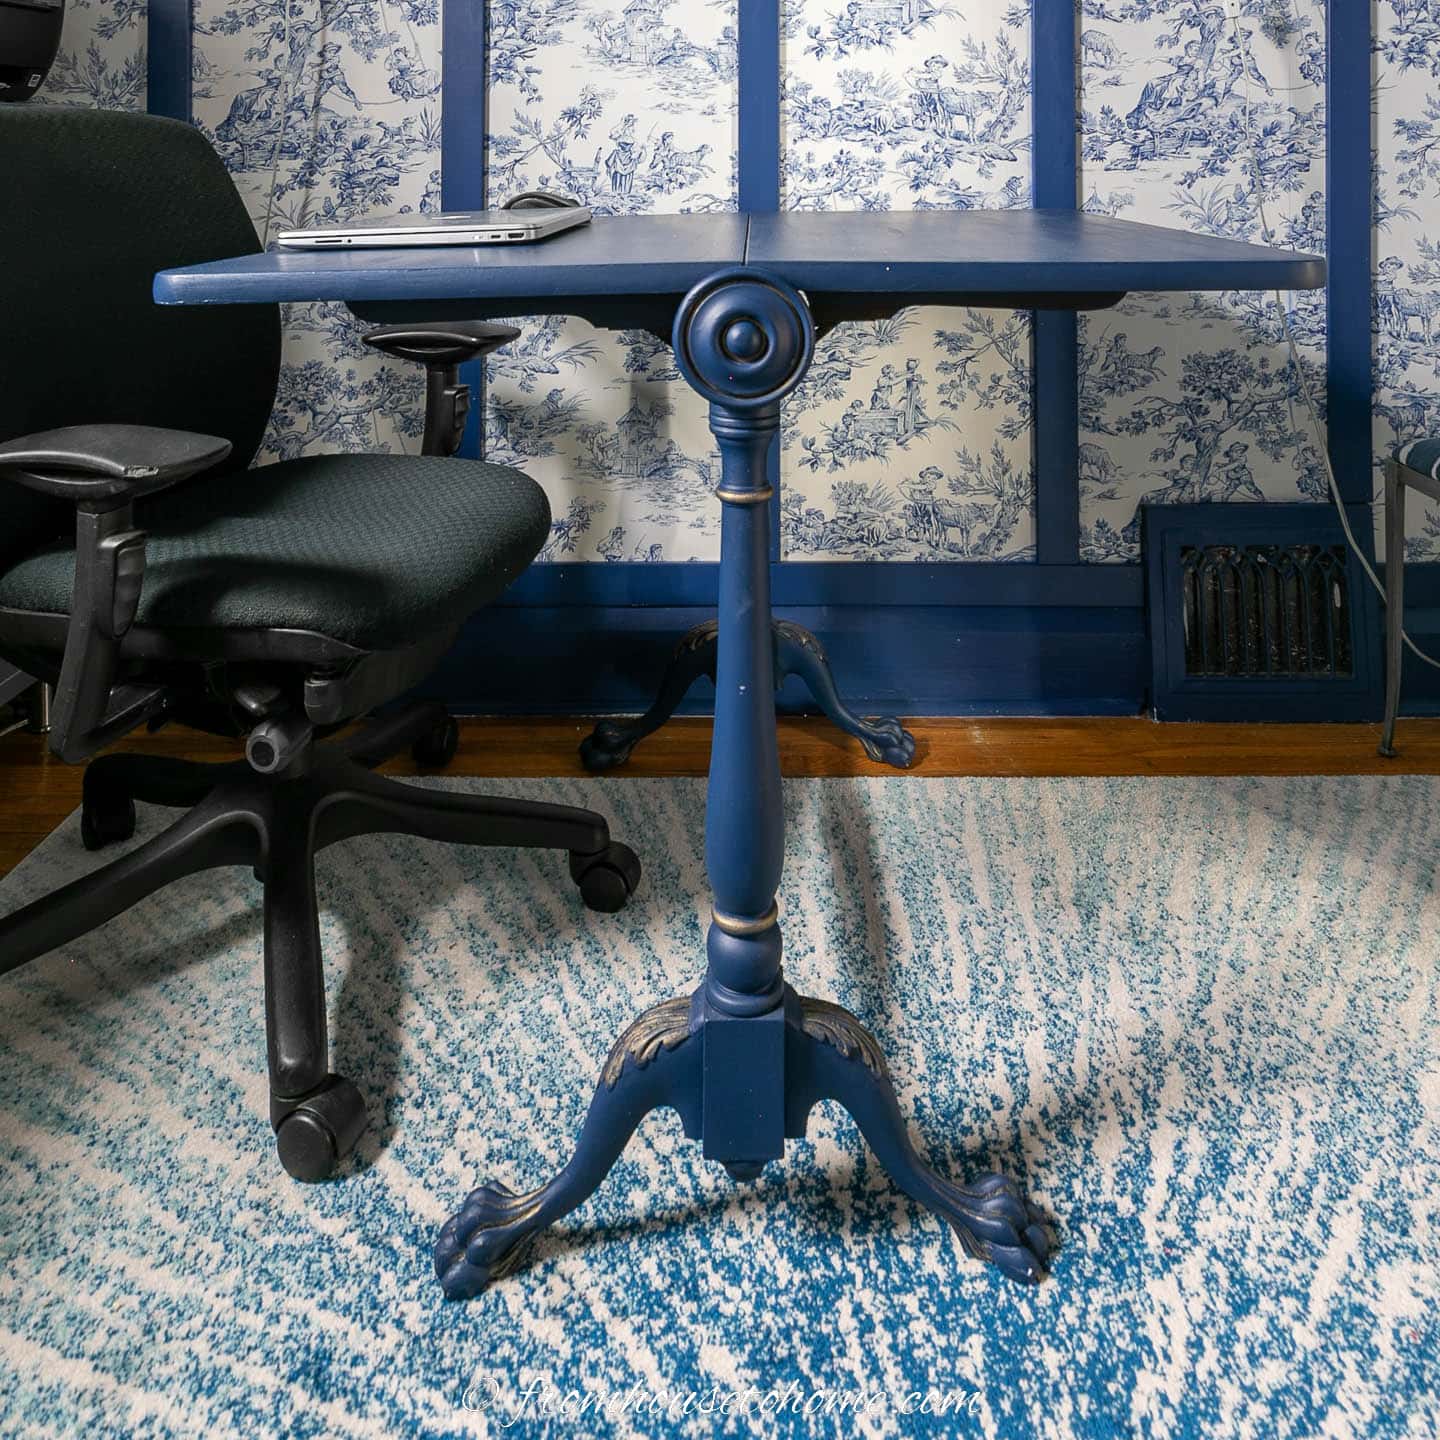 A small blue drop leaf table being used as a desk